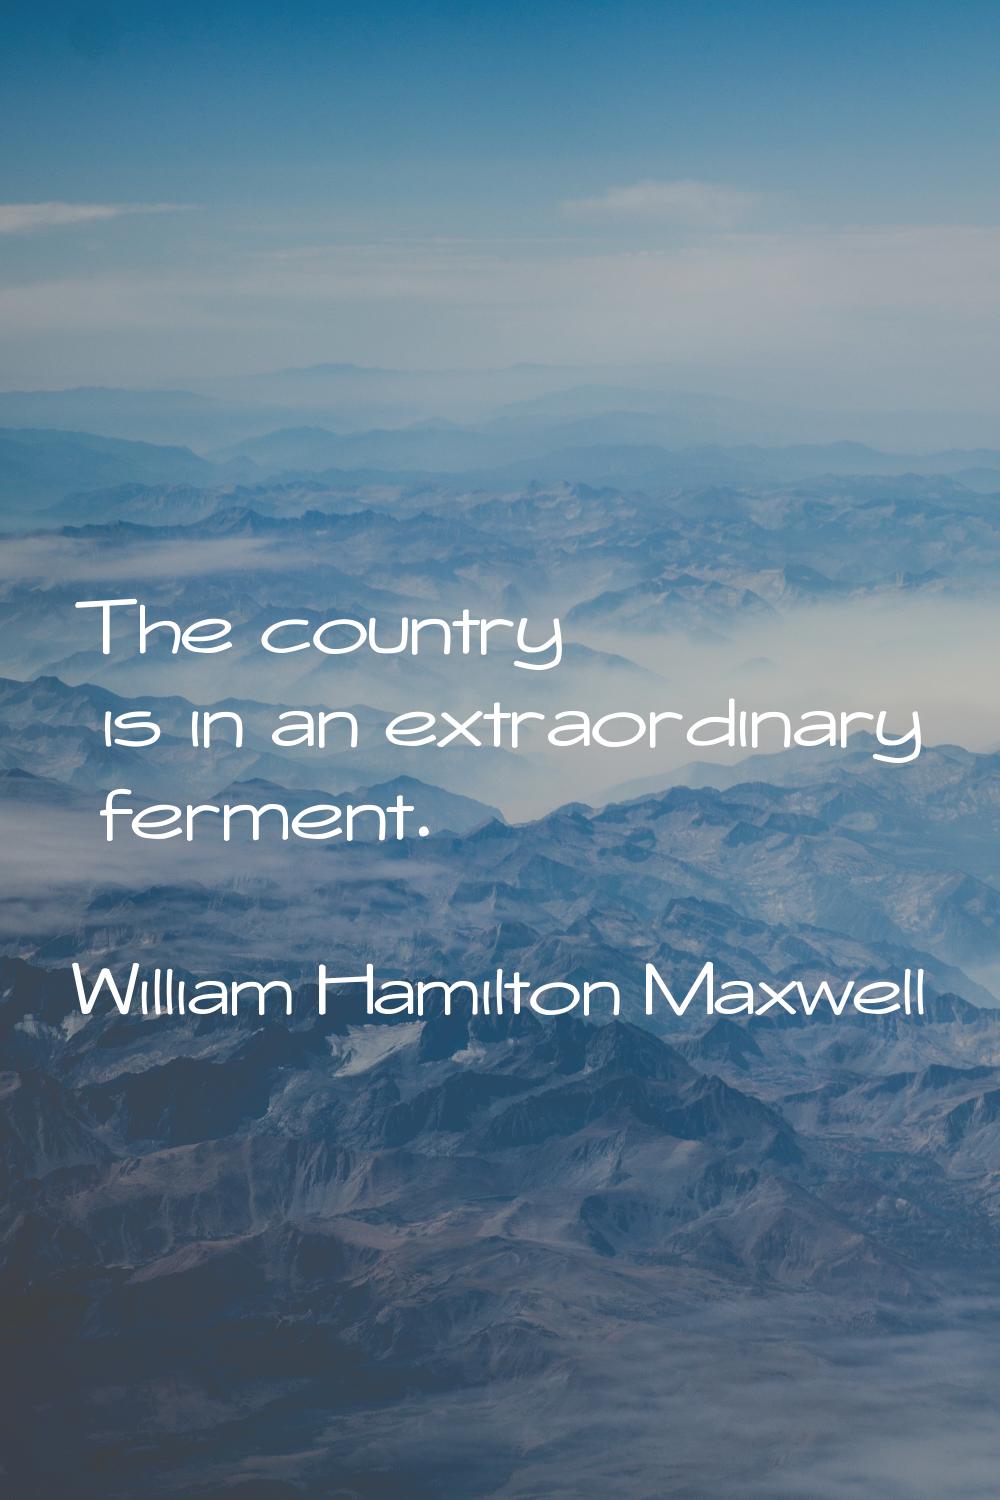 The country is in an extraordinary ferment.